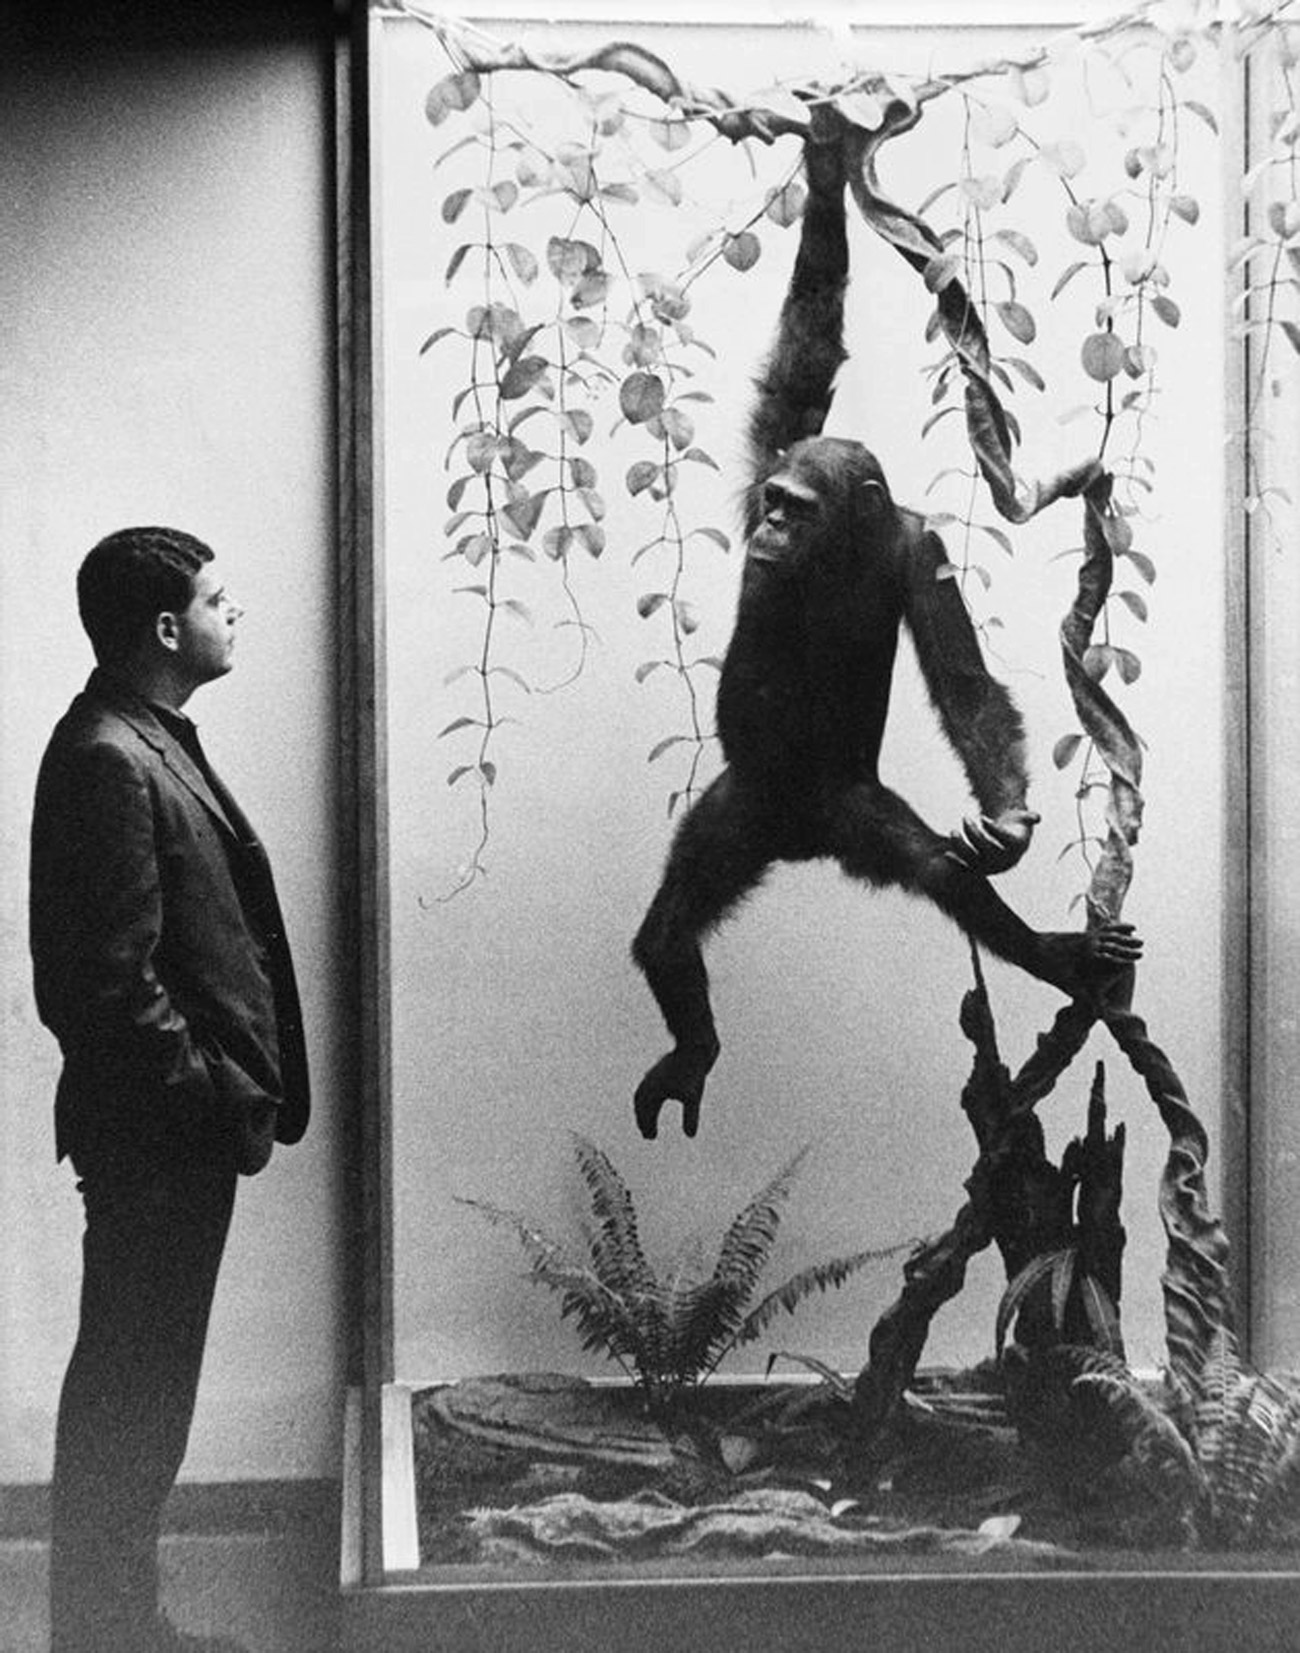 Alex J. Rota, « Visitor viewing siamang exhibit, Hall of Primates, 1965 », American Museum of Natural History Library.